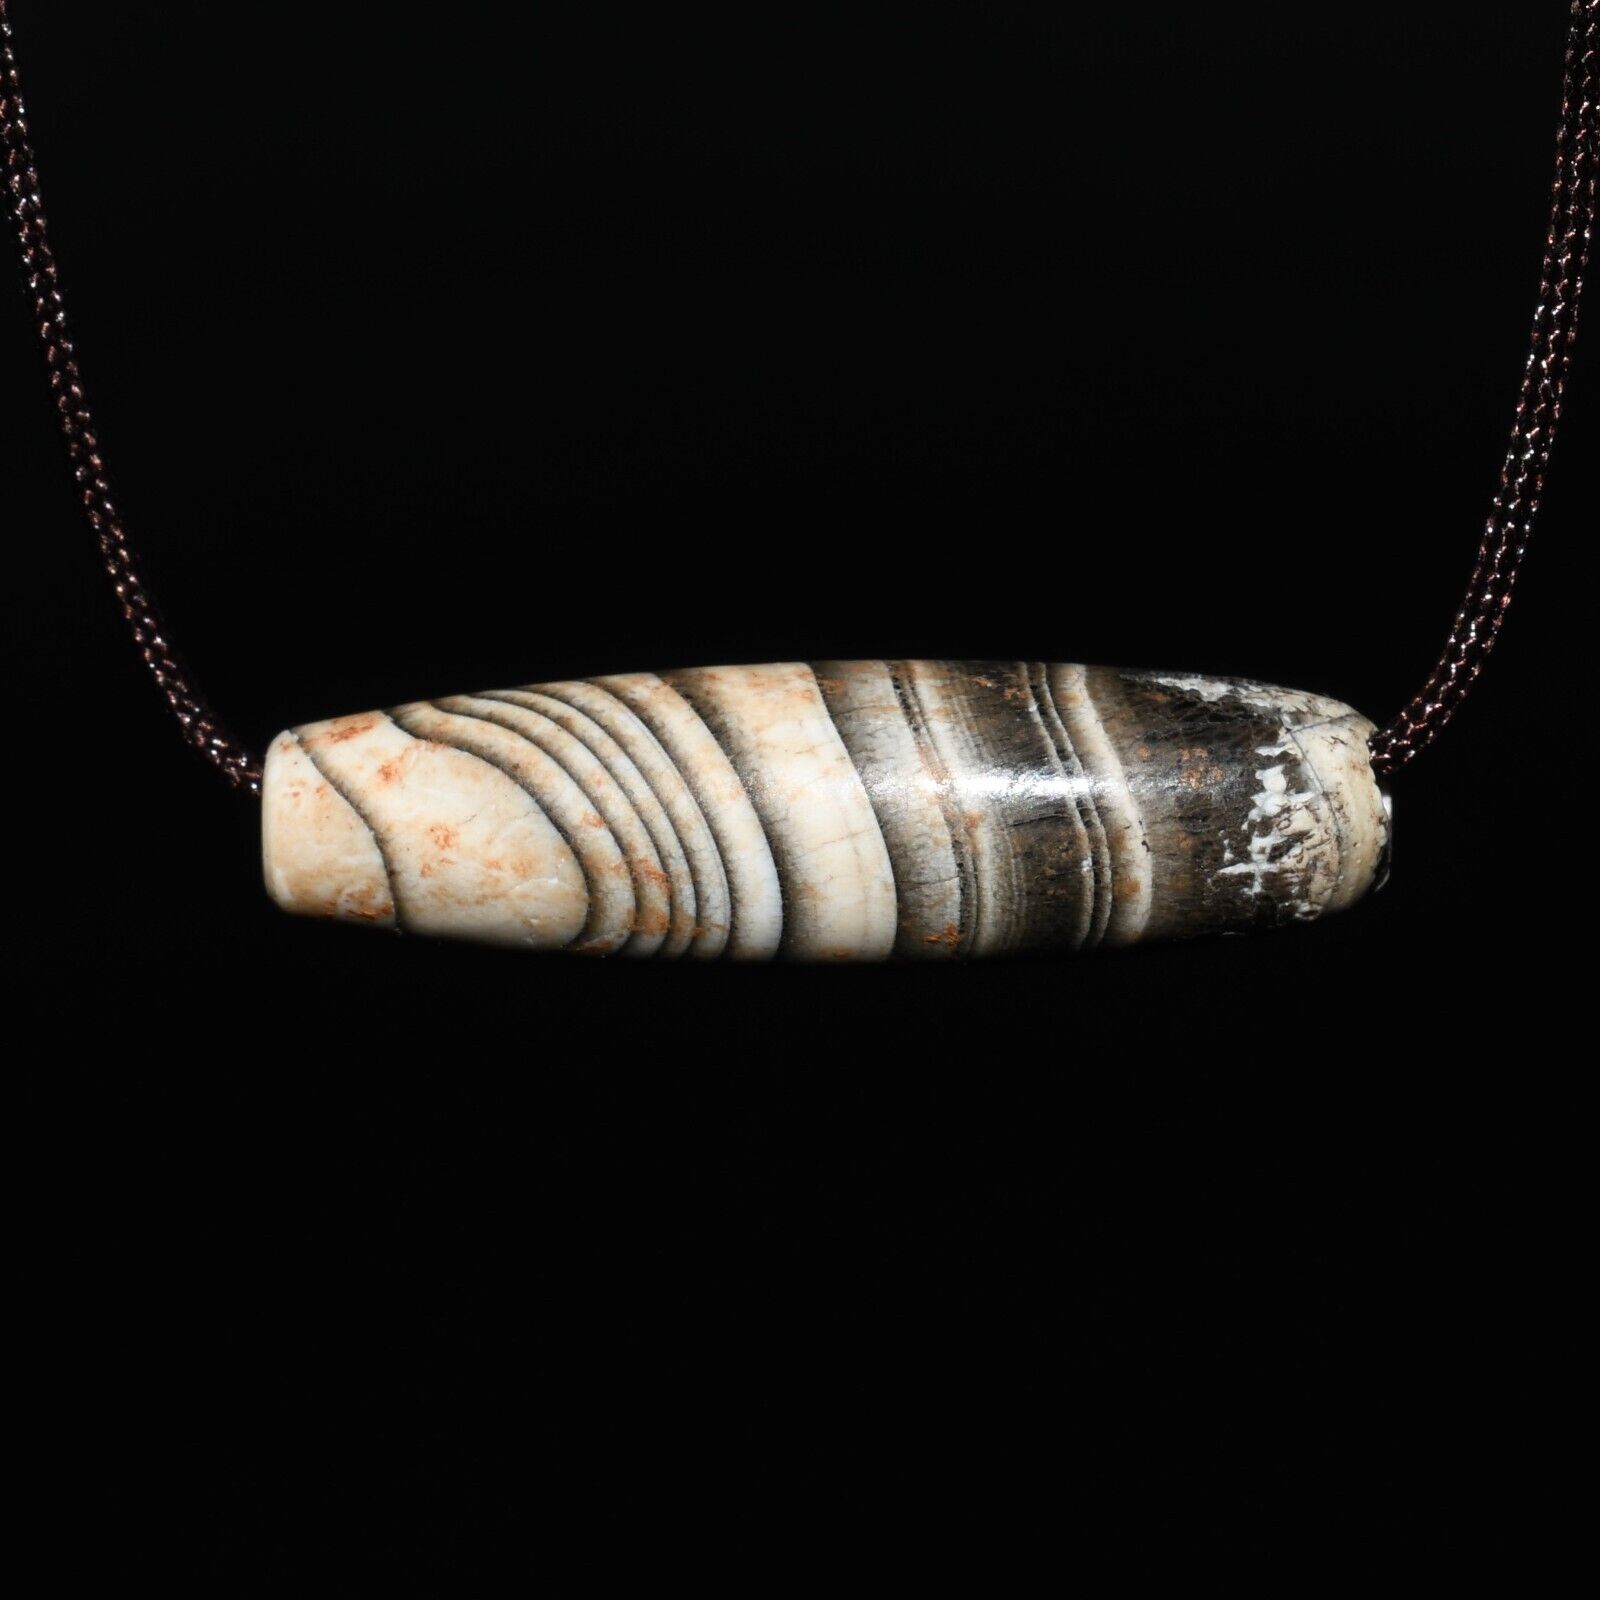 Ancient Old Indo Bactrian Banded Agate Bead with Multiple Stripes